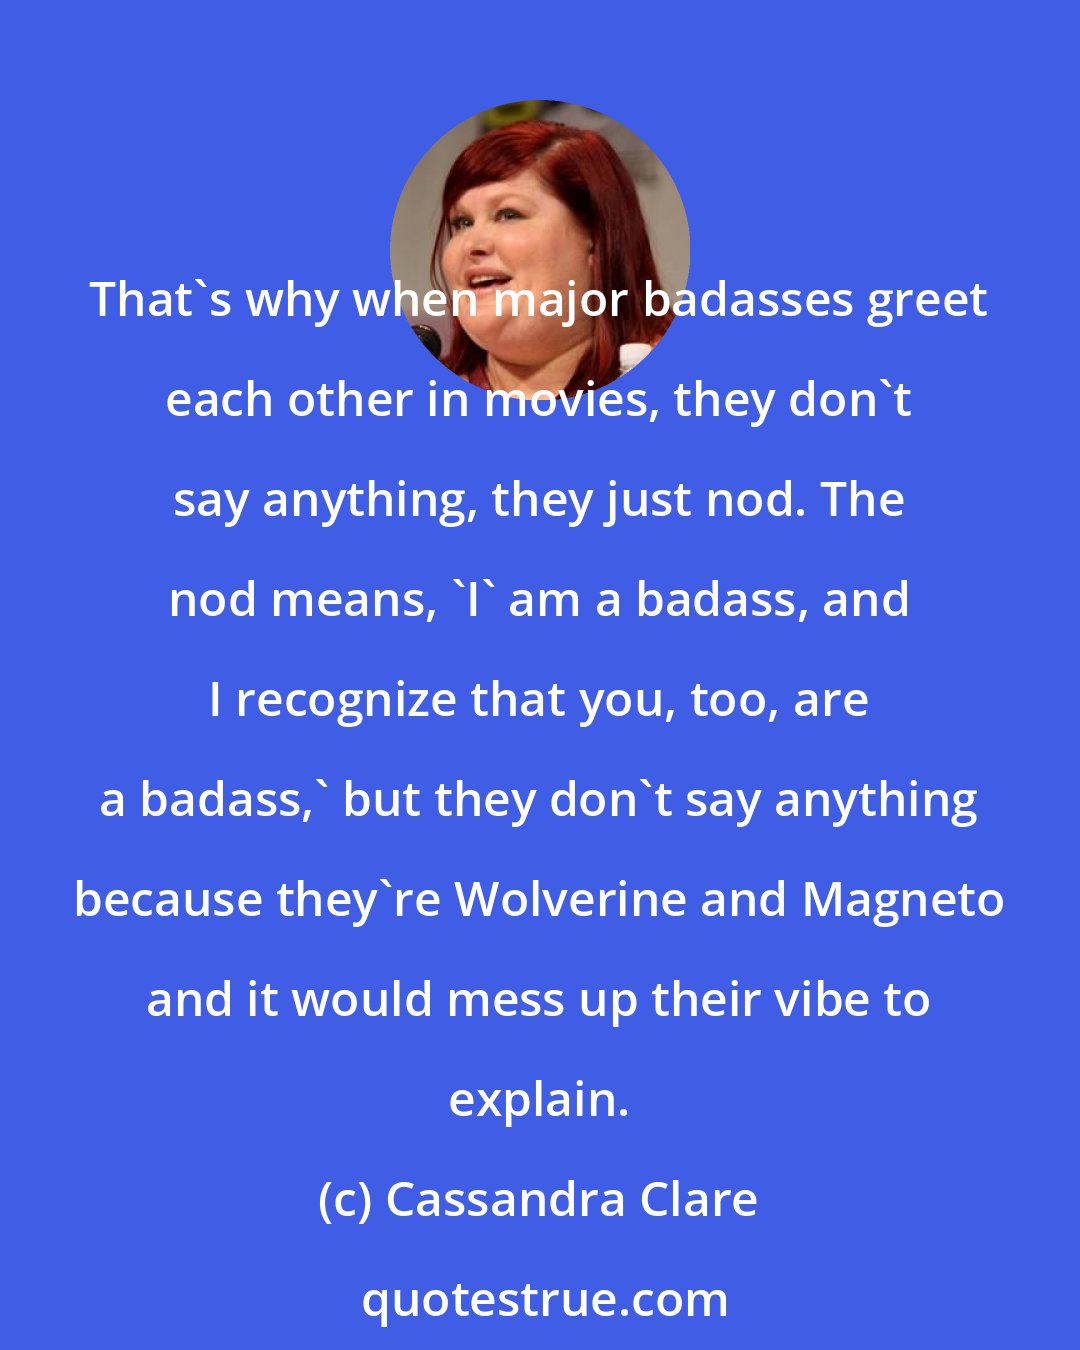 Cassandra Clare: That's why when major badasses greet each other in movies, they don't say anything, they just nod. The nod means, 'I' am a badass, and I recognize that you, too, are a badass,' but they don't say anything because they're Wolverine and Magneto and it would mess up their vibe to explain.